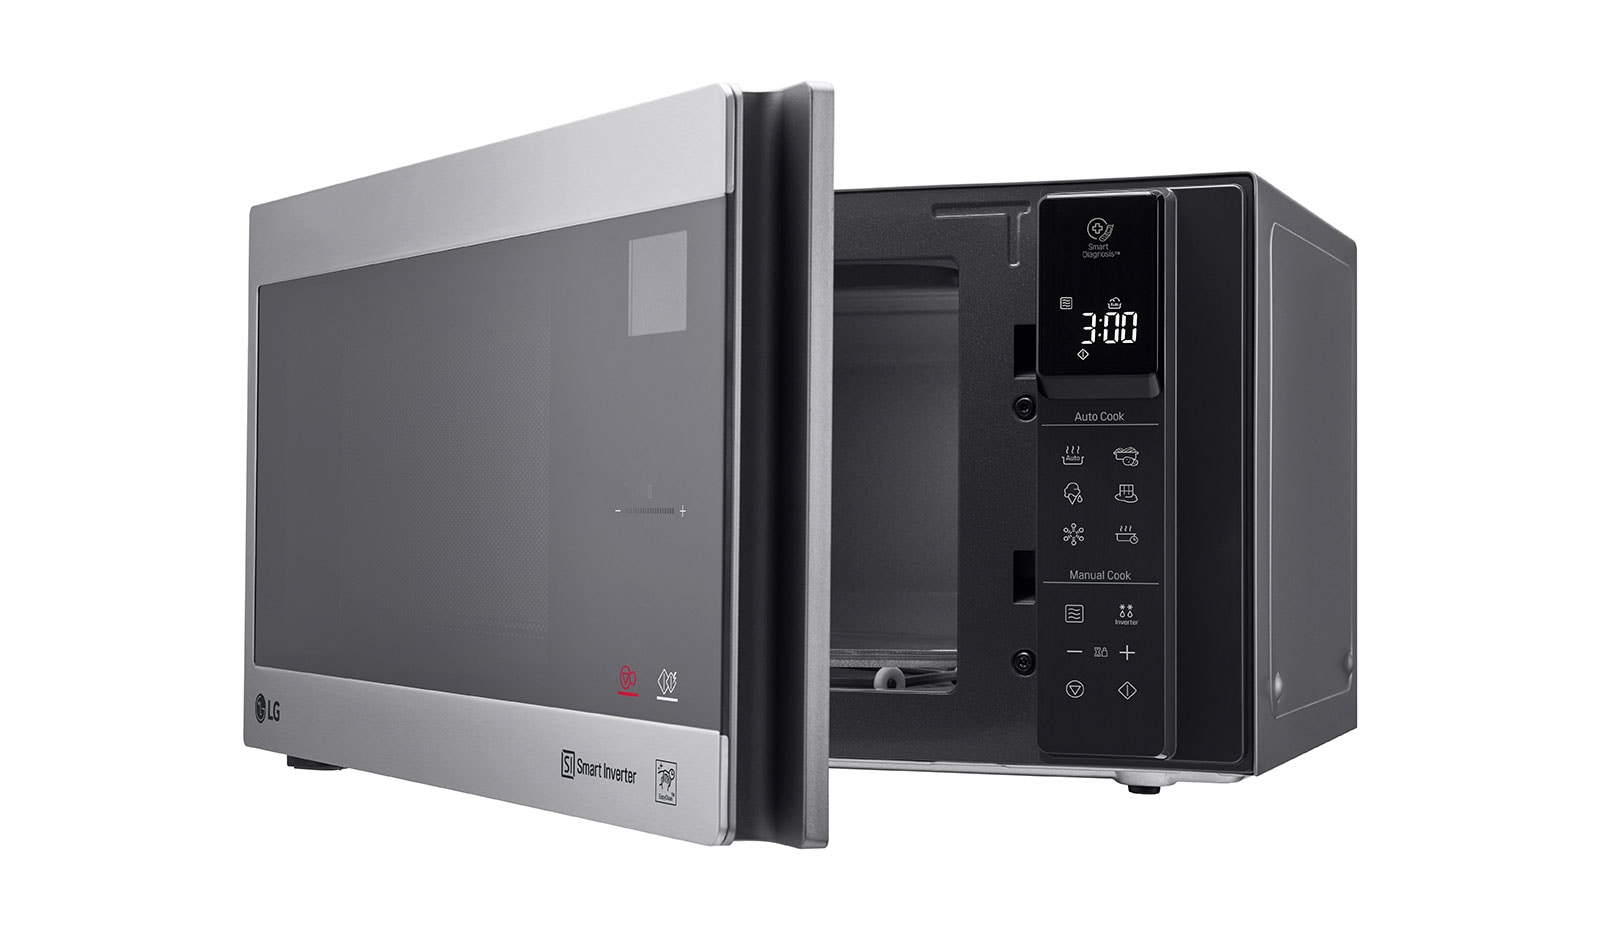 LG 25 Liter Microwave Oven - Silver